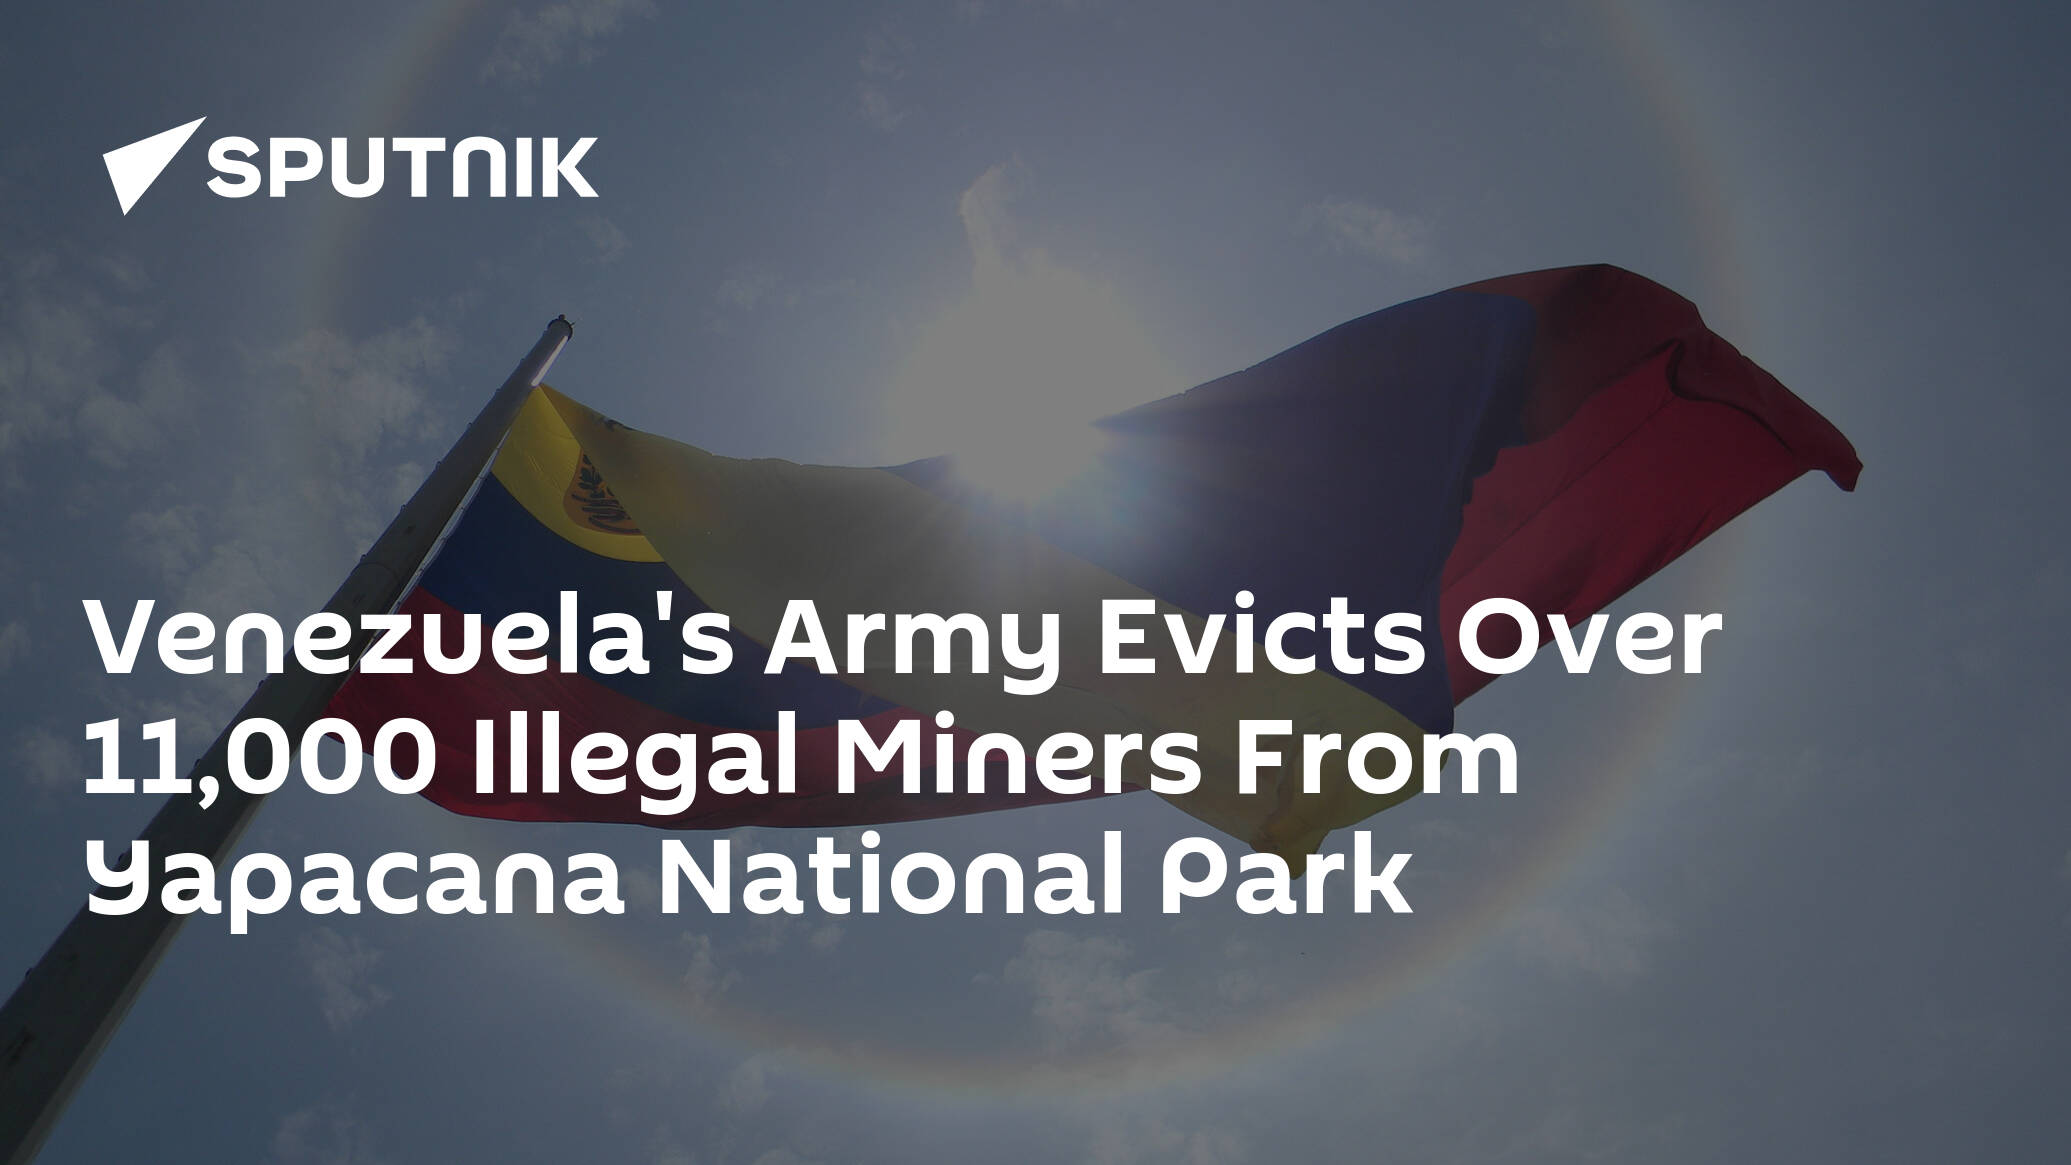 Venezuela's Army Evicts Over 11,000 Illegal Miners From Yapacana National Park